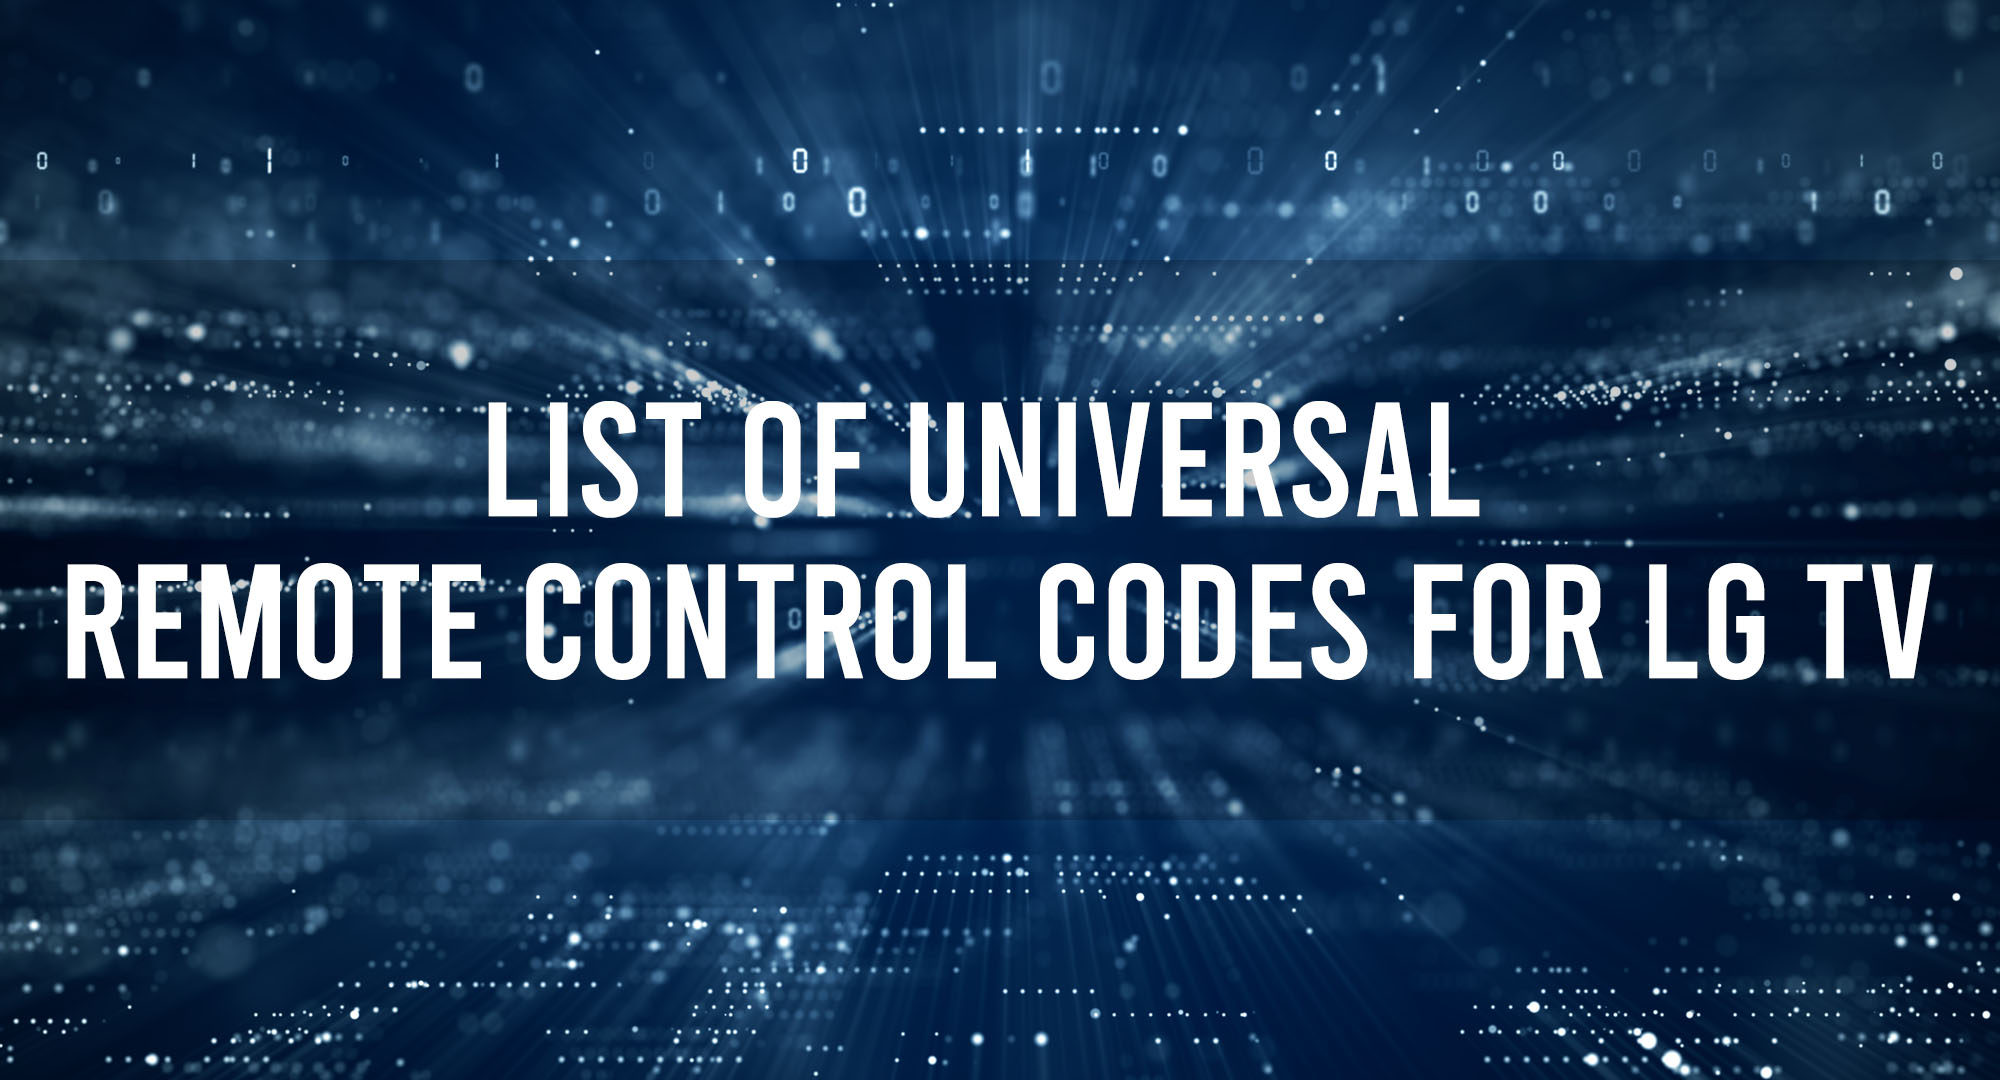 List of Universal Remote Control Codes For LG TV